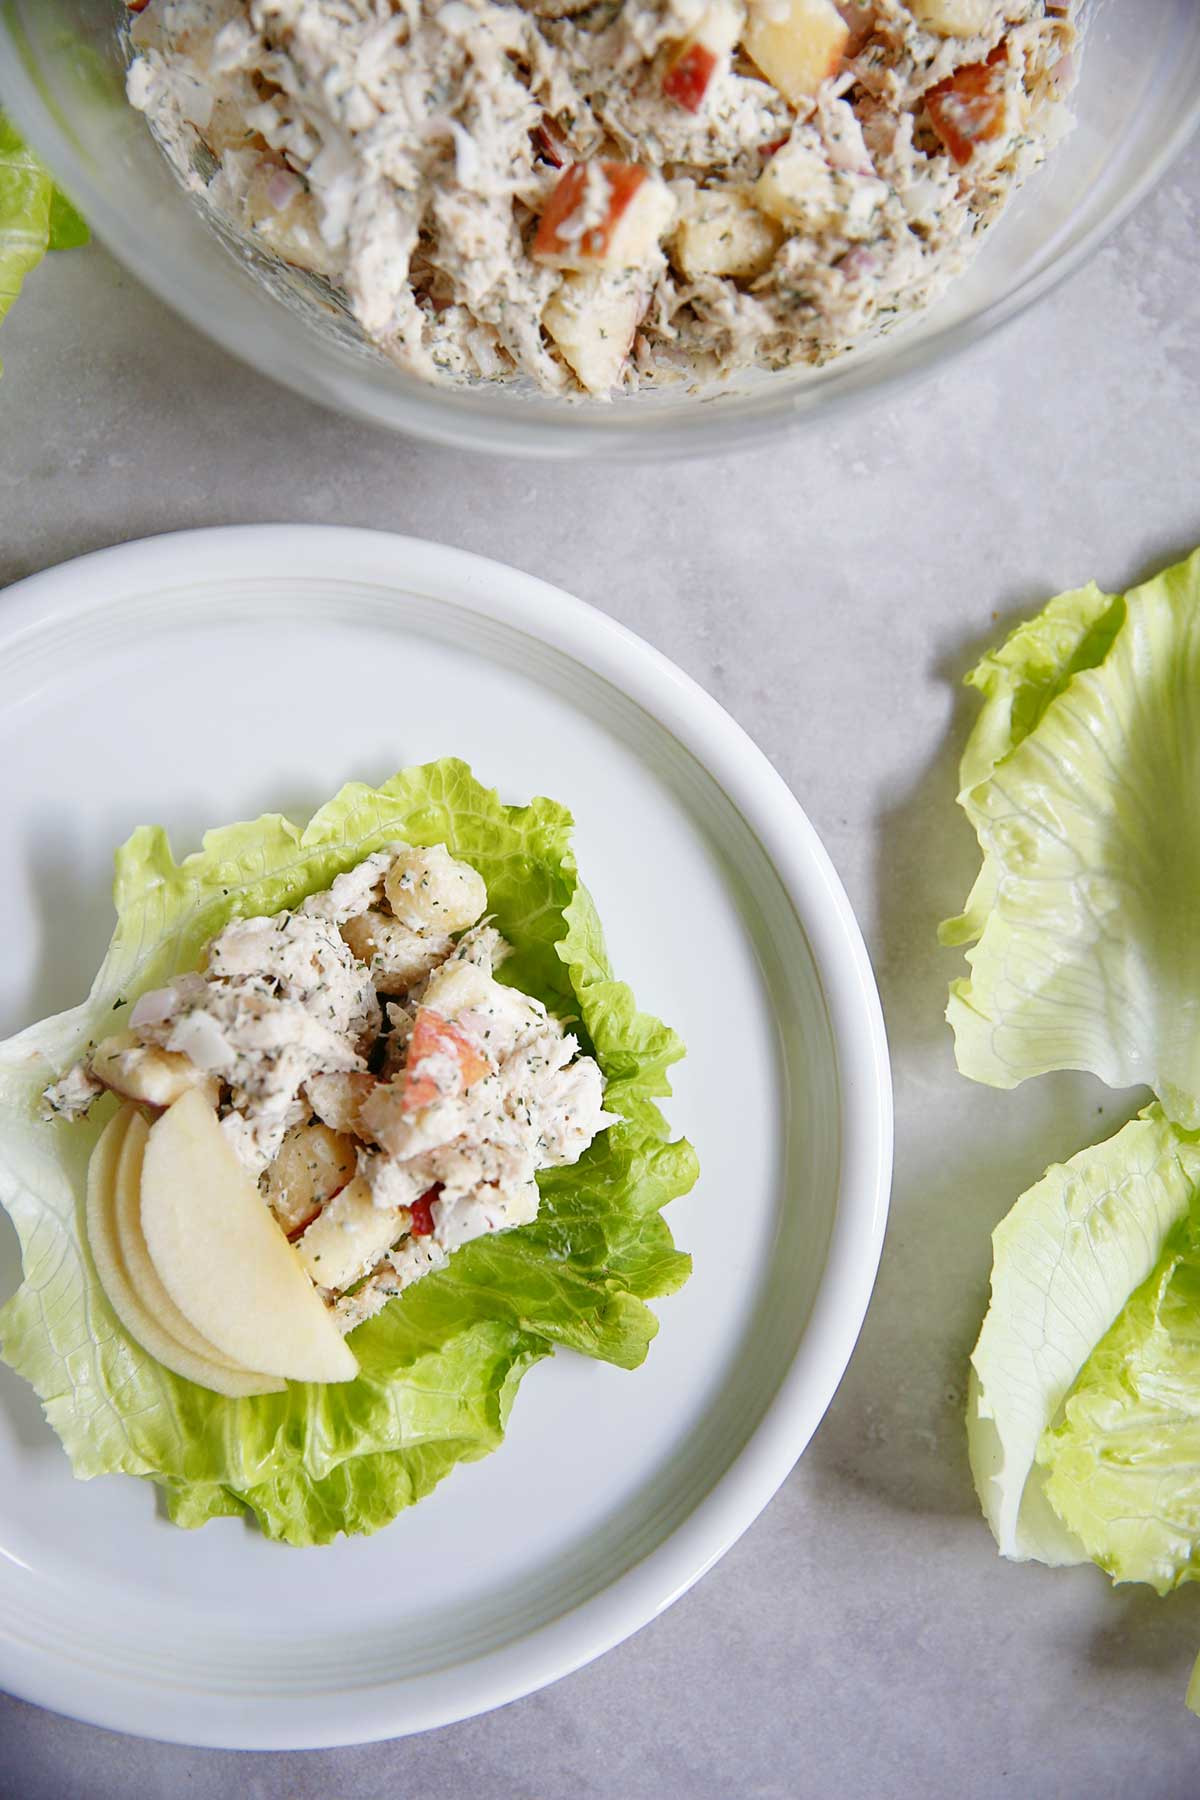 Chicken Salad Recipe With Apples
 Lexi s Clean Kitchen